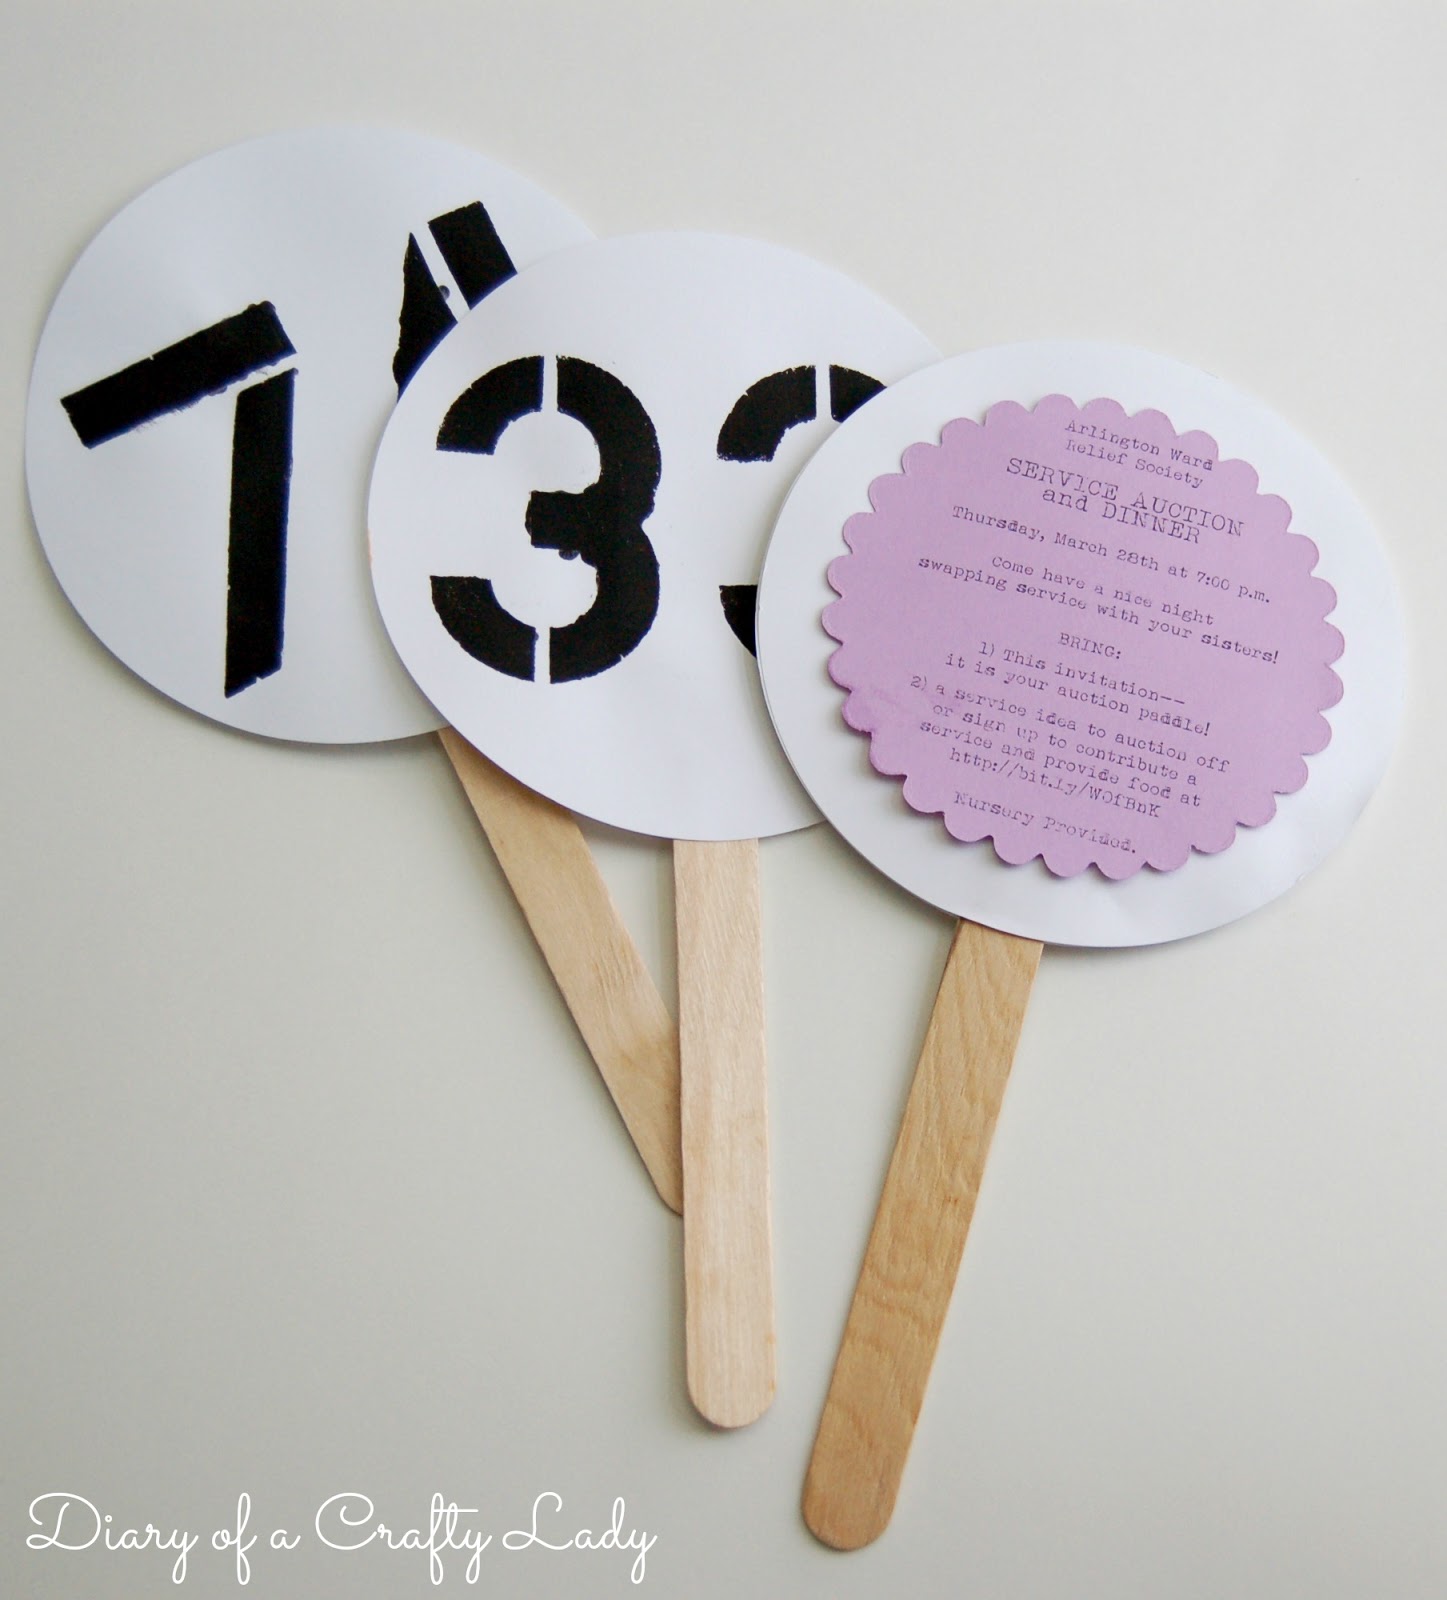 Buy Auction Paddles | Numbered Bid Paddles | Kiefer Auction Supply